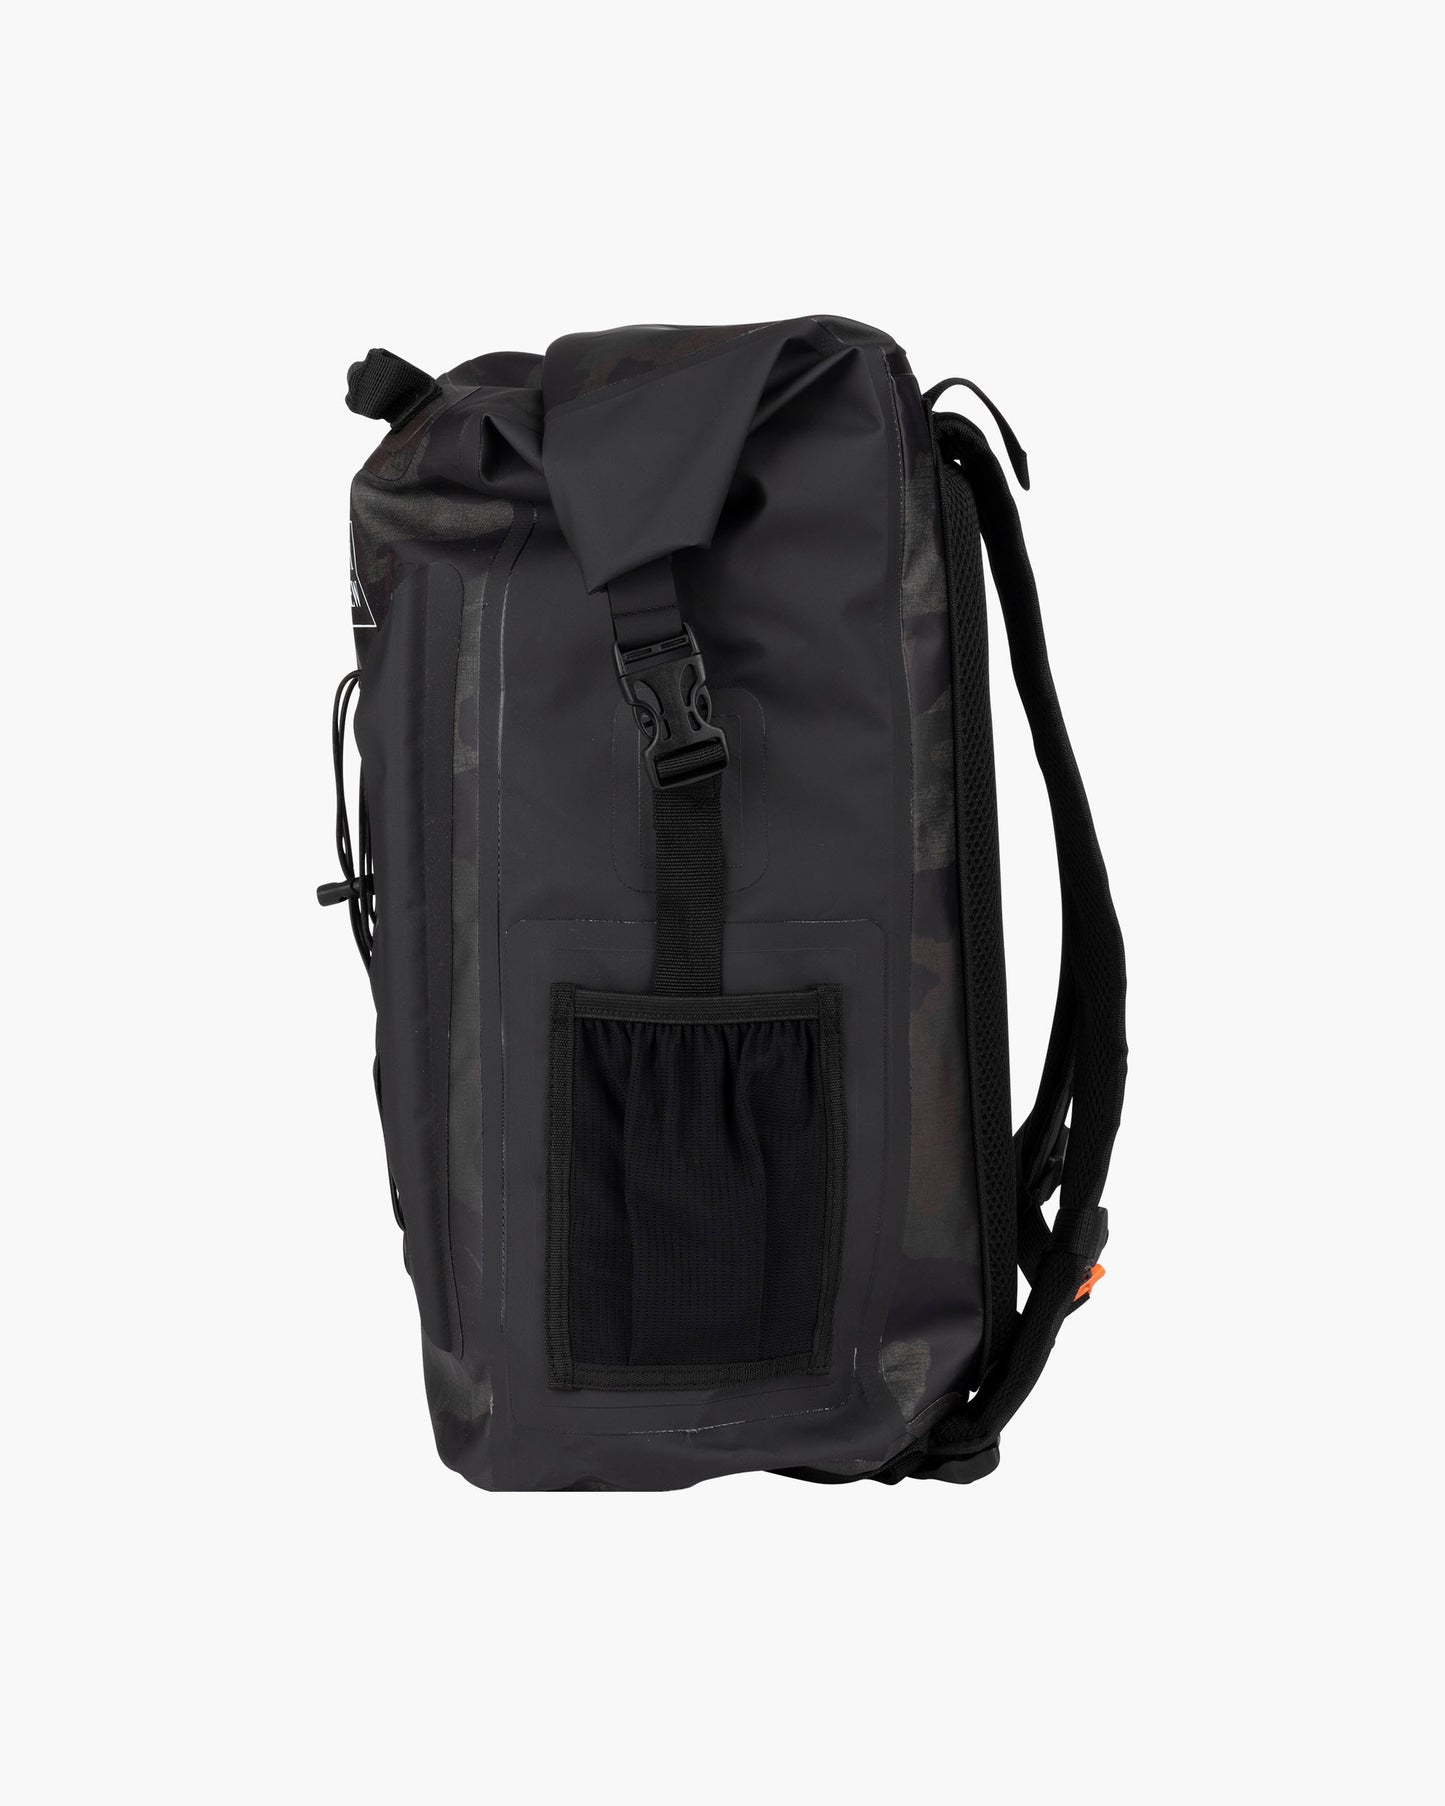 VOYAGER ROLL TOP BACKPACK - Camo